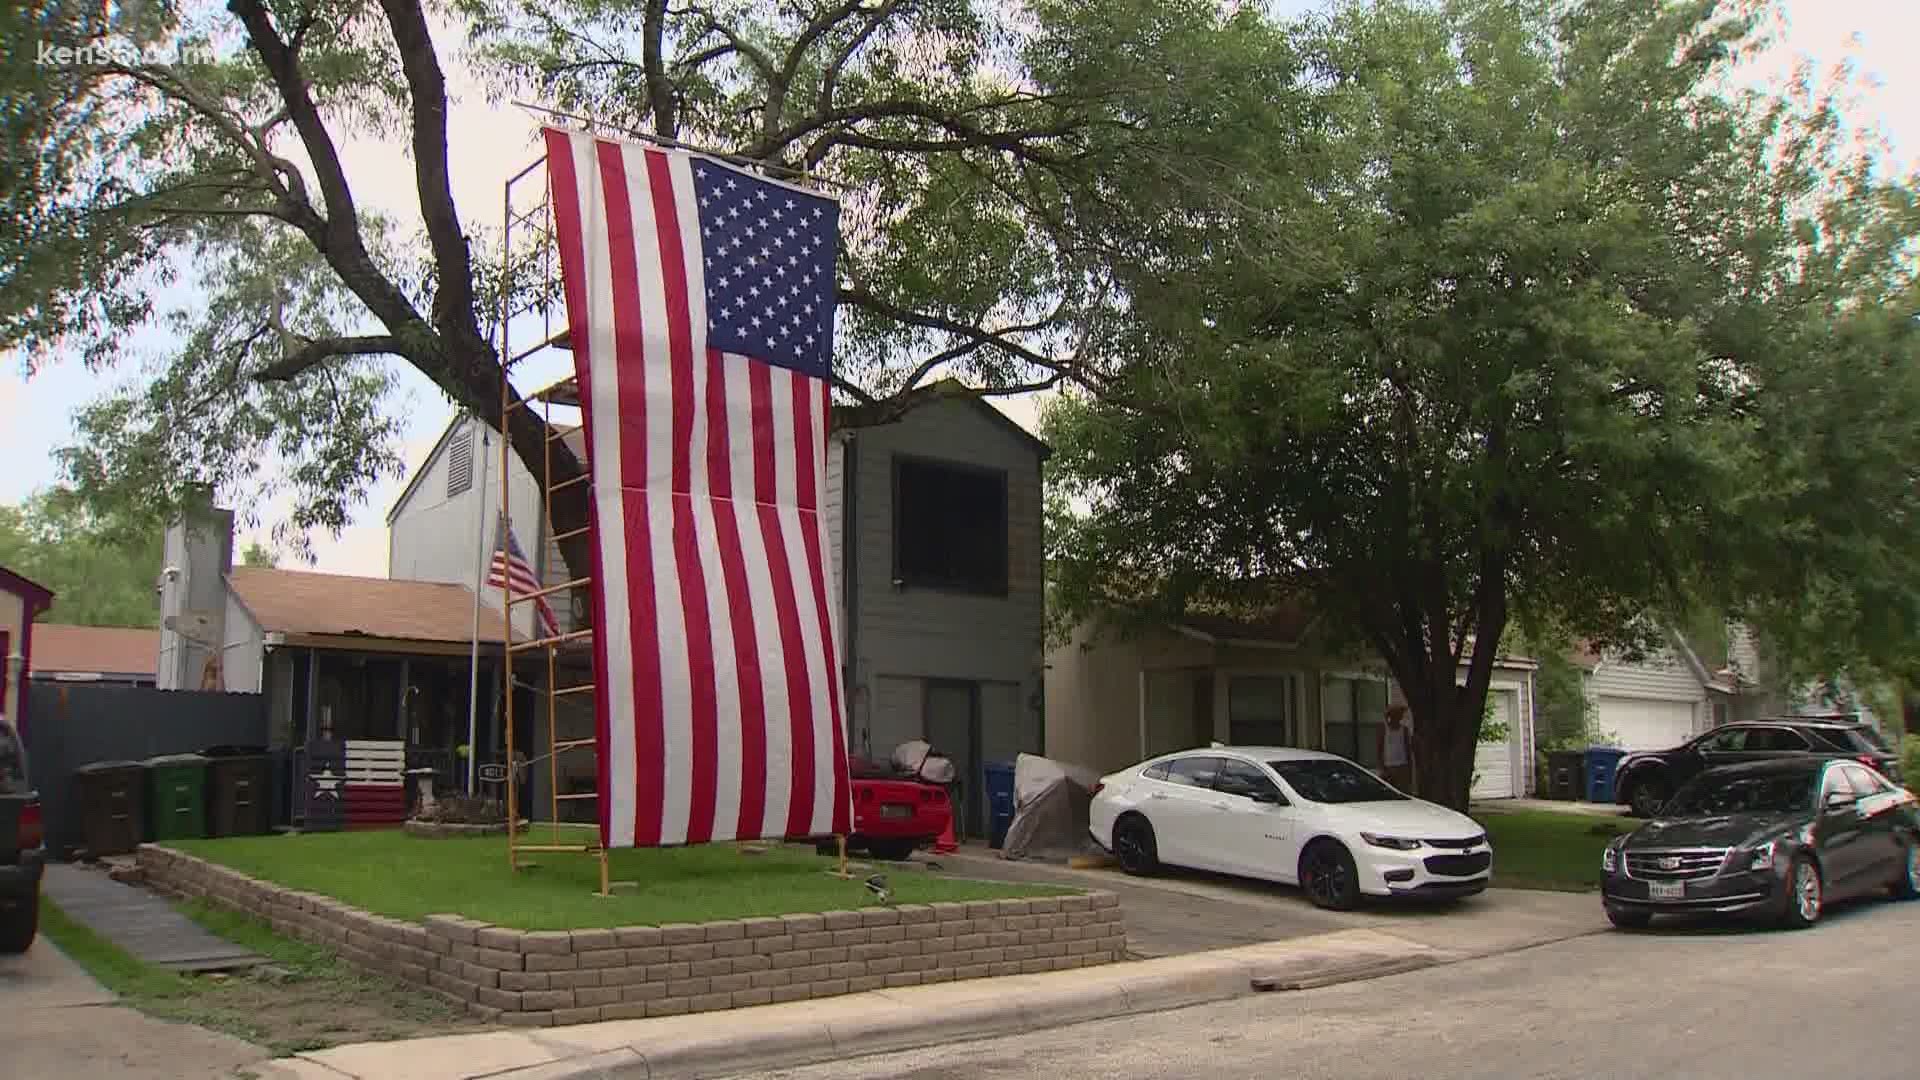 He says he plans to hang his new huge U.S. flag on the Fourth of July as well.